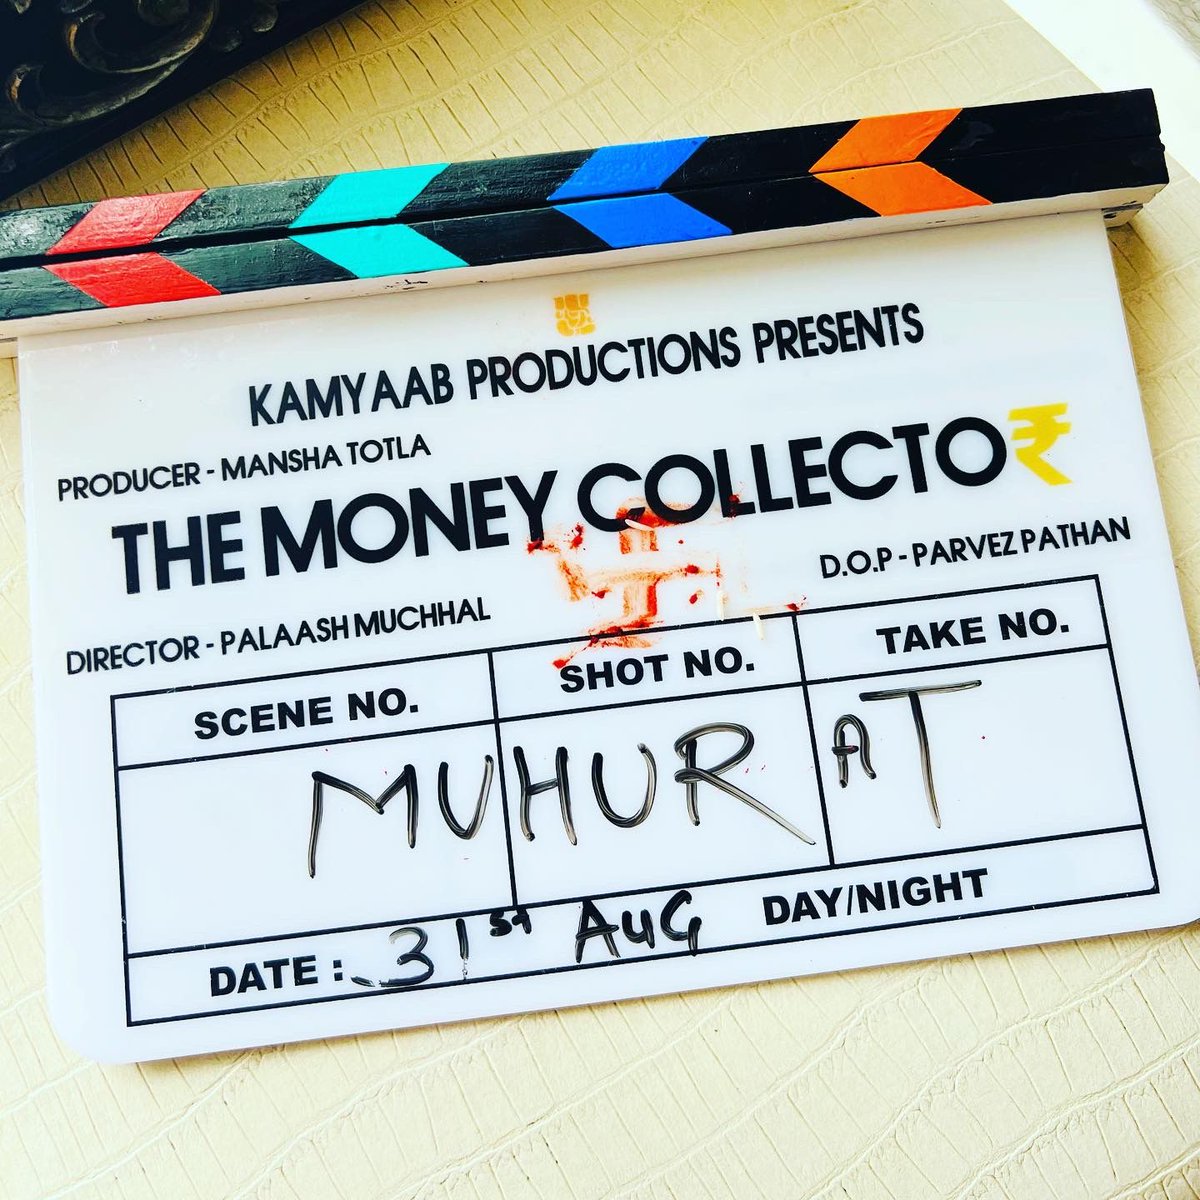 PALAASH MUCHHAL'S SECOND FILM 'THE MONEY COLLECTOR'... After the successful release of #Ardh, music composer - director #PalaashMuchhal's second film is titled #TheMoneyCollector... Producer #ManshaTotla also launches her production house #KamyaabProductions with this film.